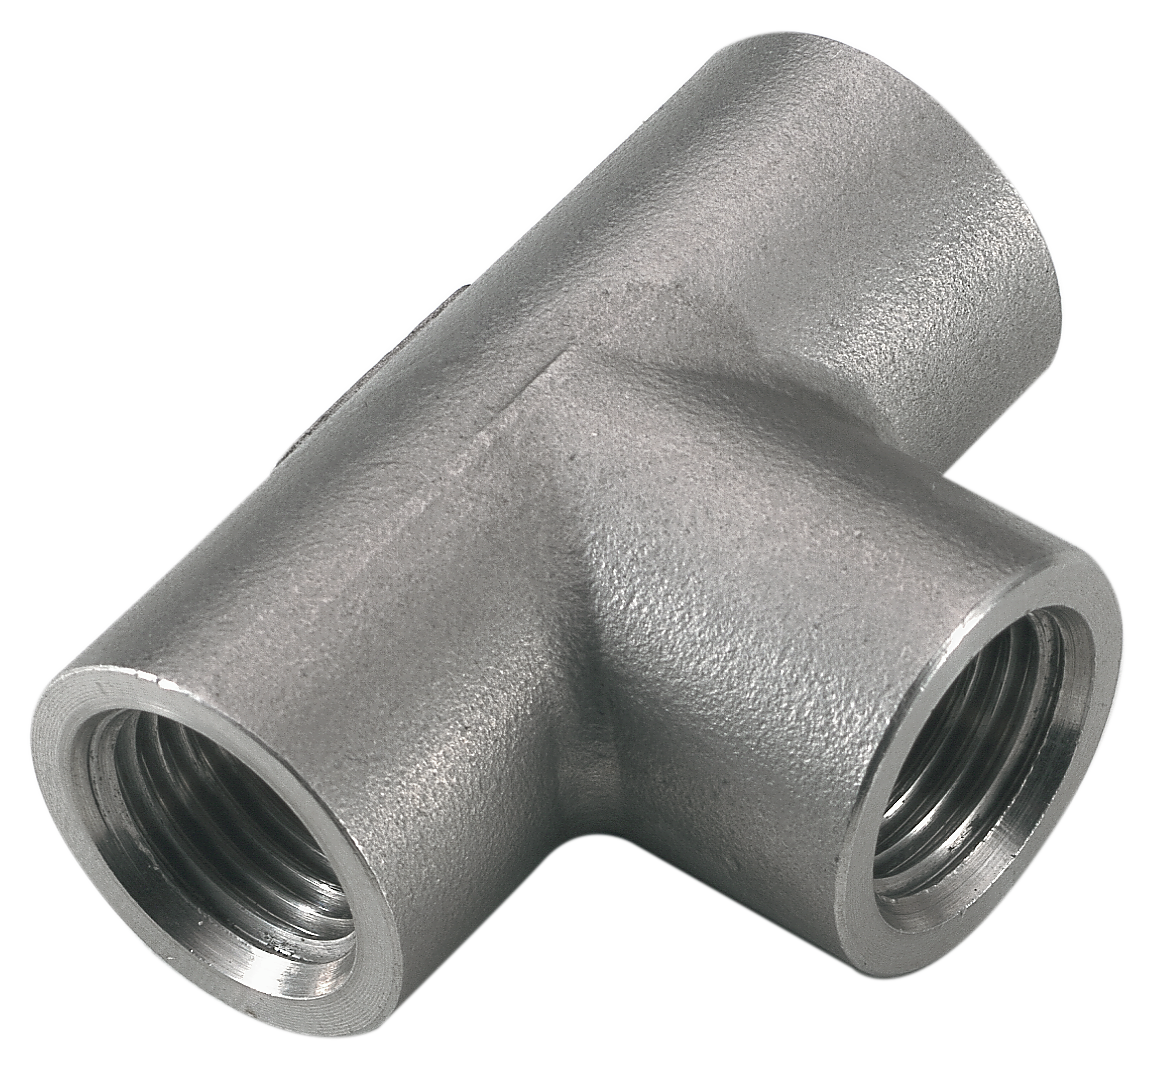 T equal female cylindrical stainless steel AISI 316Ti 3/4 Standard fittings in stainless steel